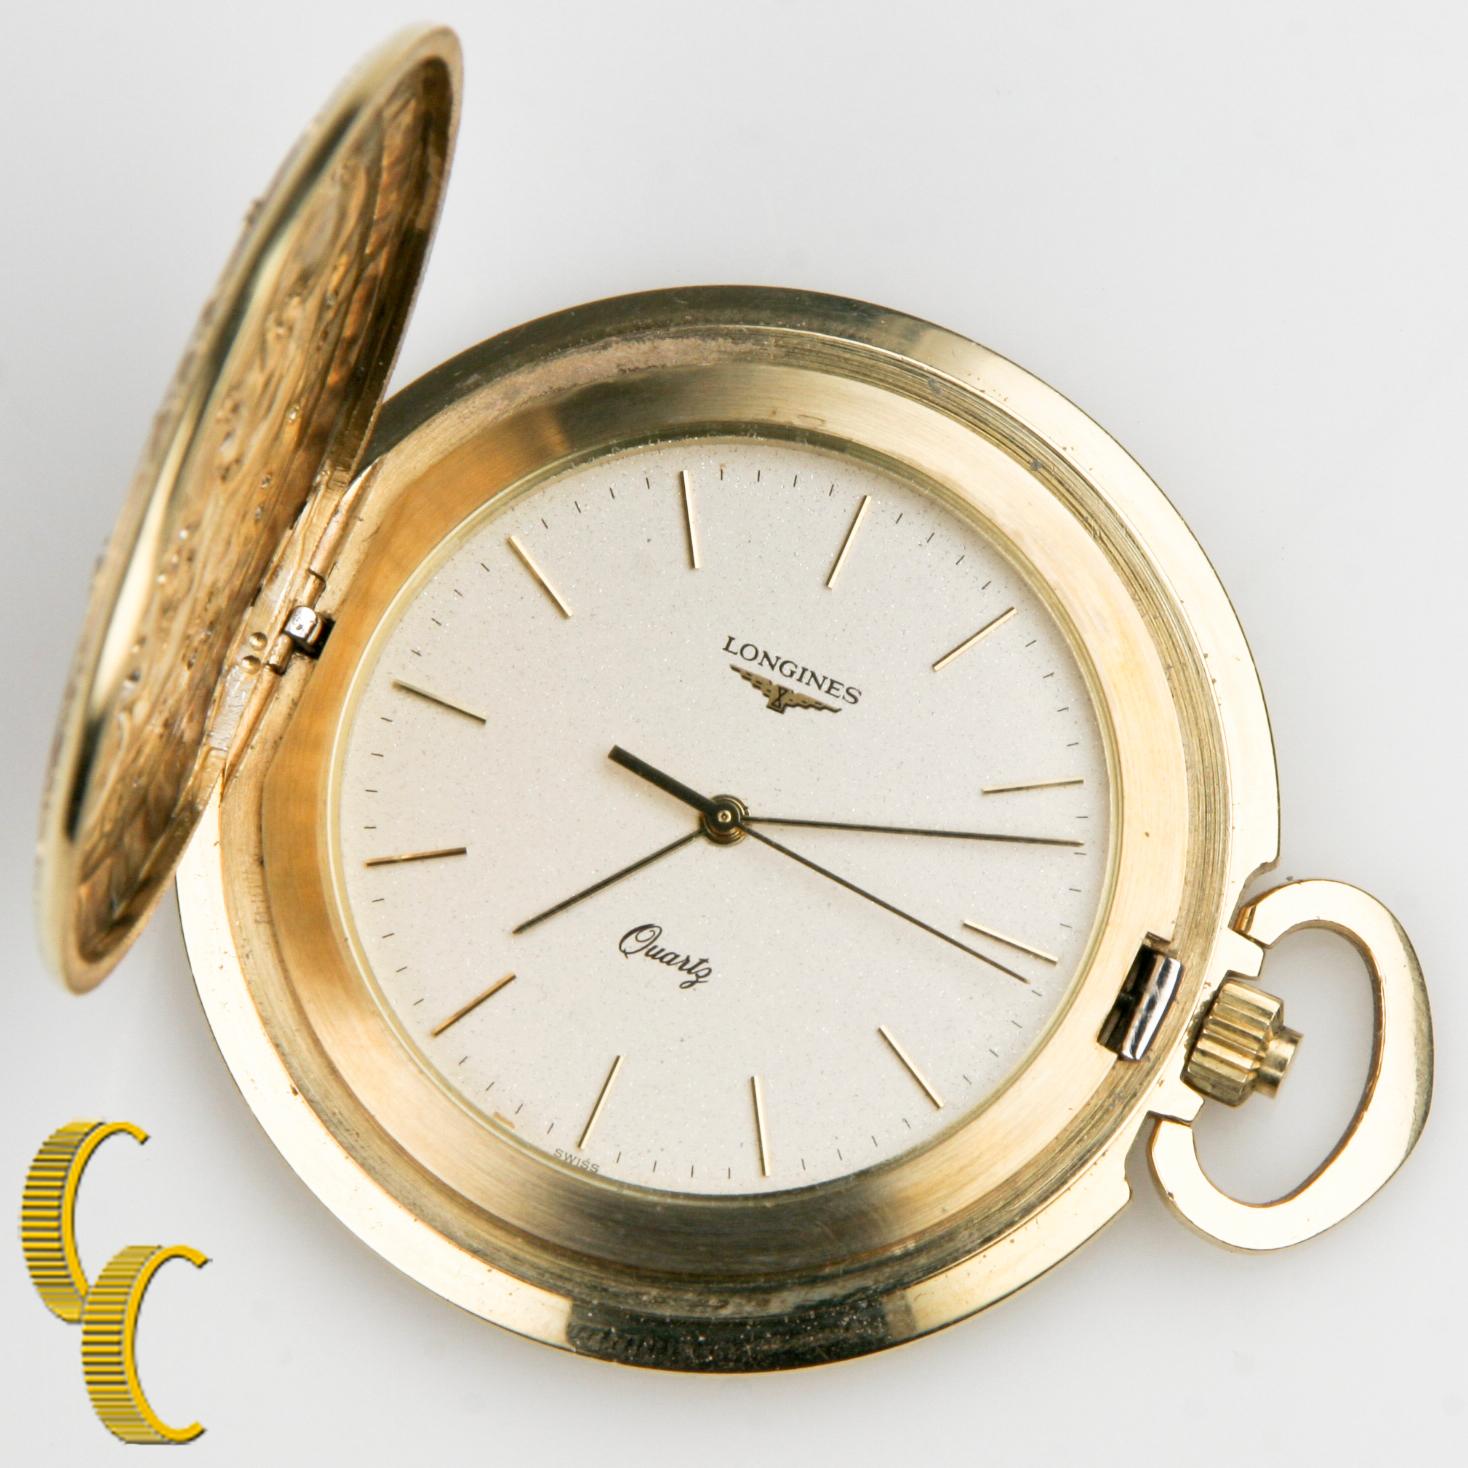 Gorgeous 14k Yellow Gold Pocket Watch by Longines
Limited Edition of 1000 Distributed for the 1984 Olympics
This Watch is Number 353
Includes Original Presentation Box
Diameter of Watch = 46 mm
Diameter of Dial = 33 mm
Total Mass of Watch =